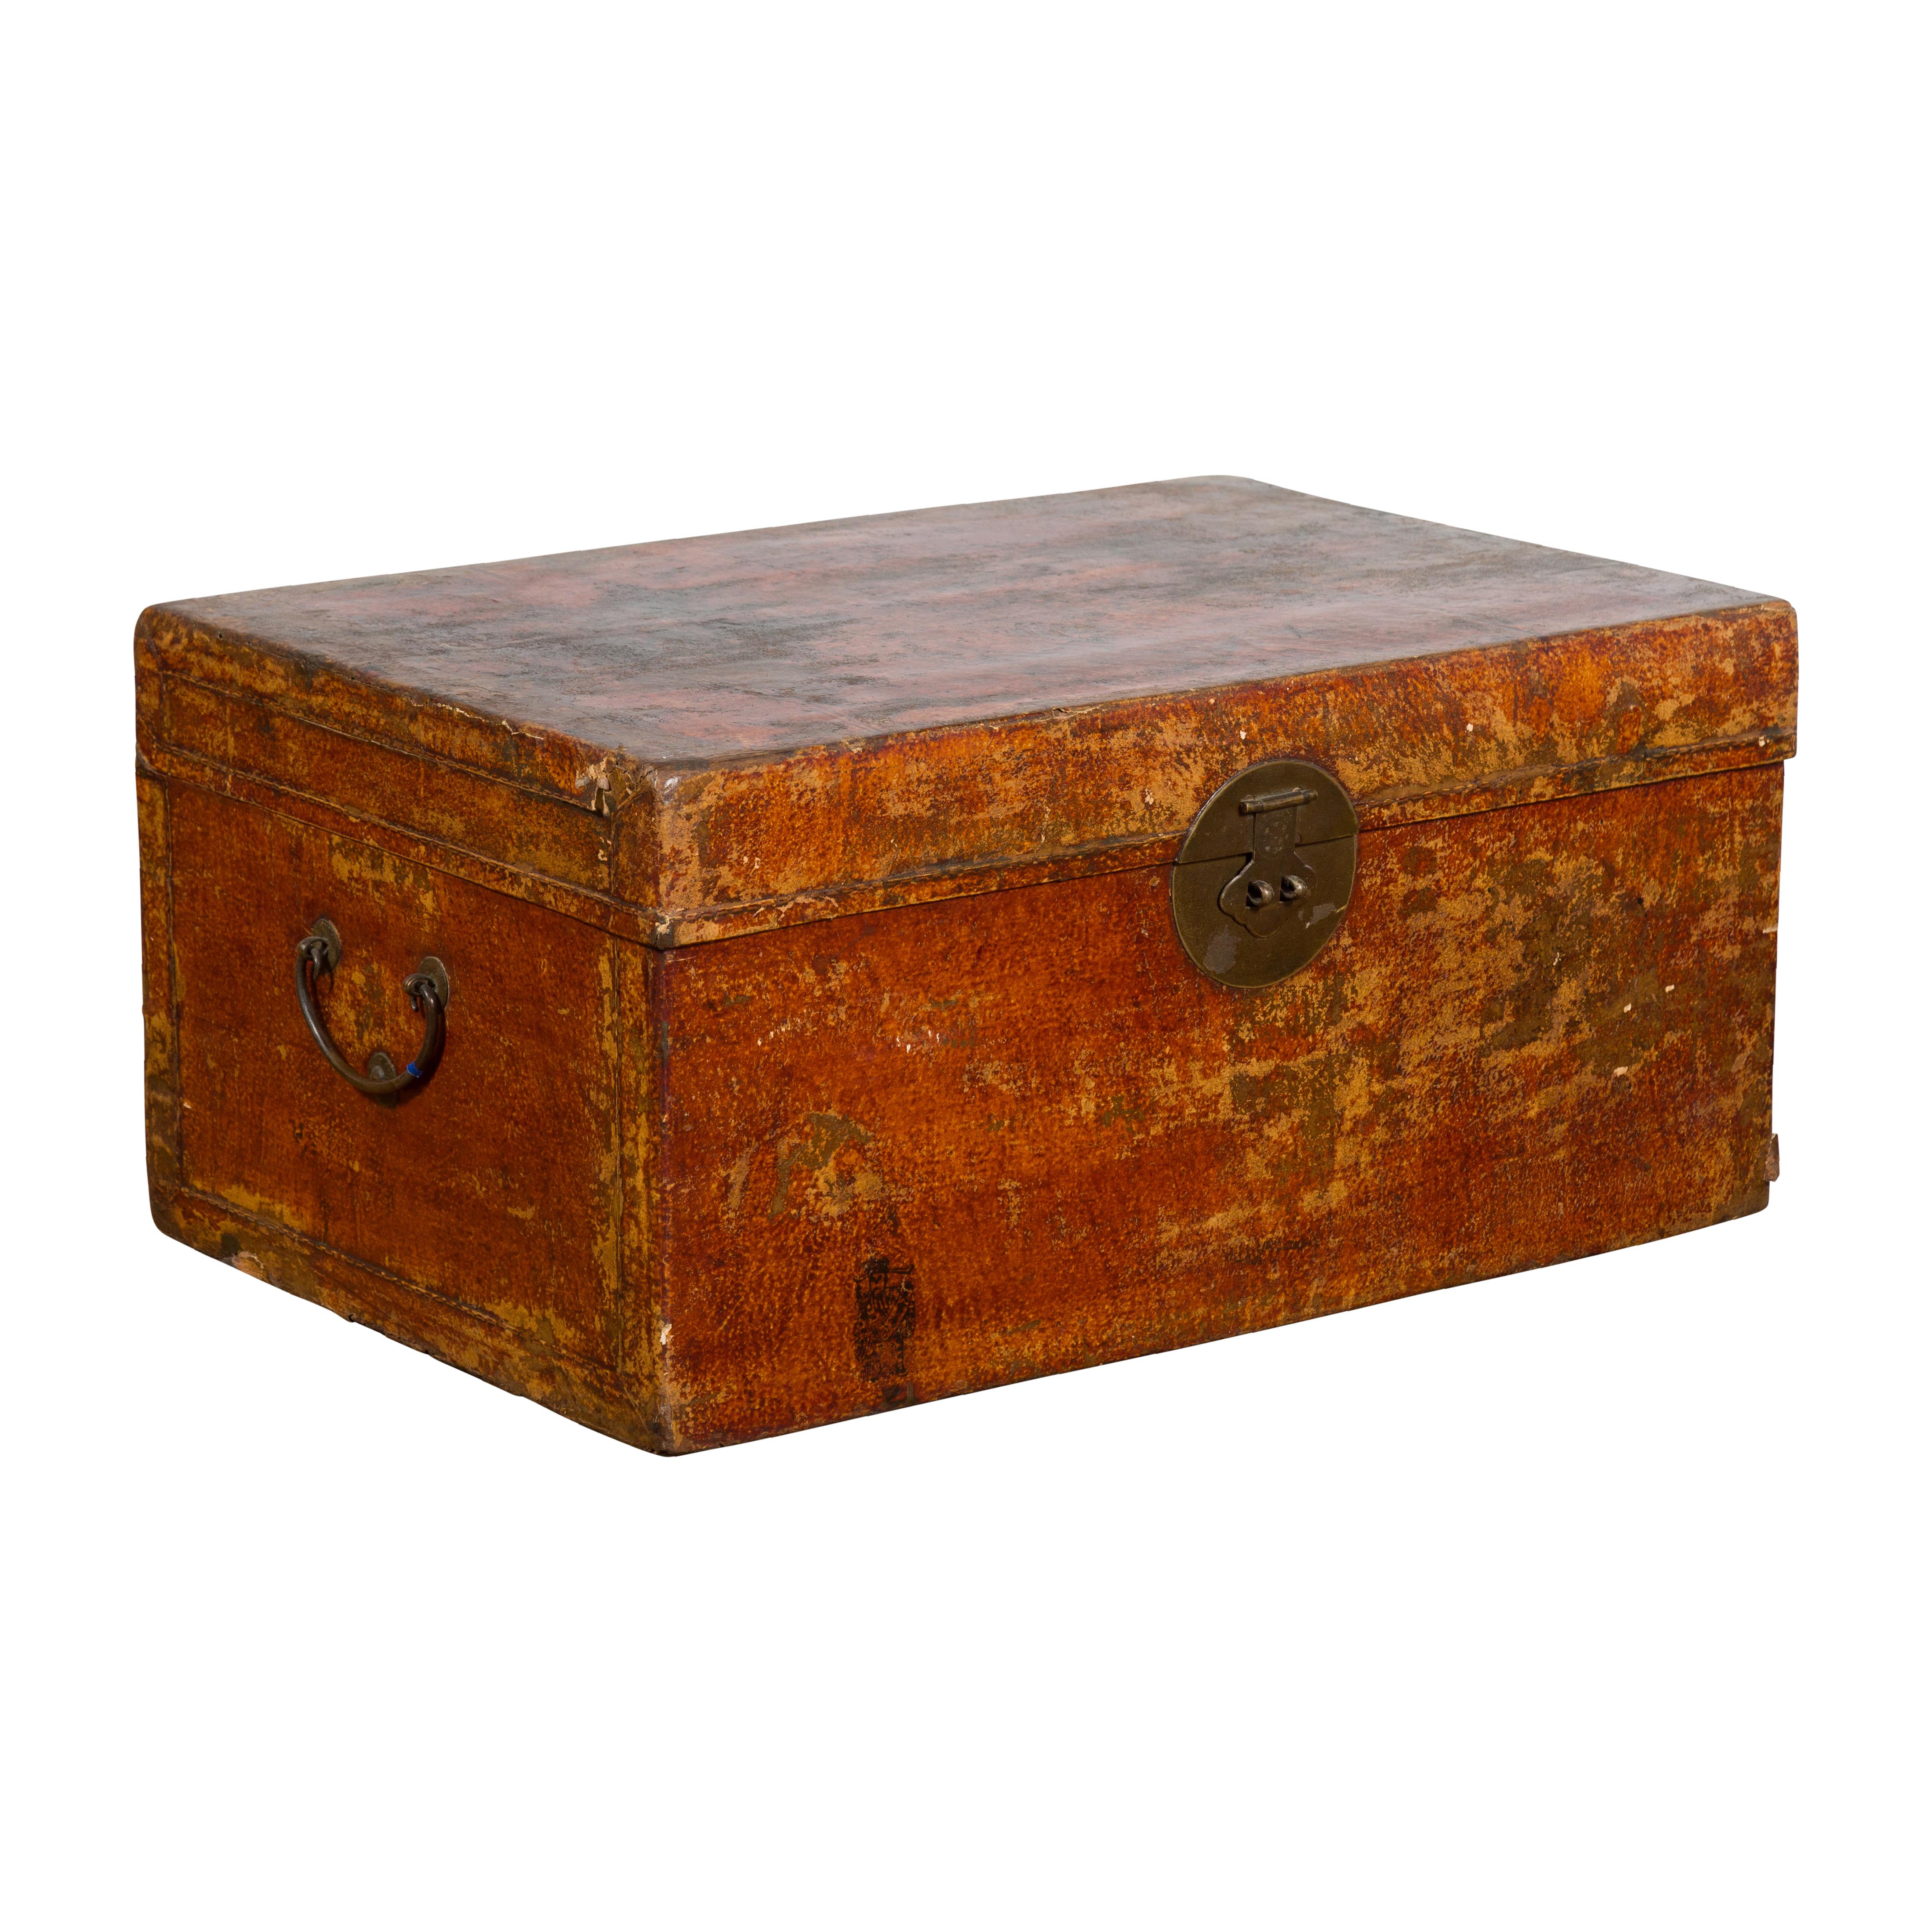 A Chinese antique Qing Dynasty period storage trunk from the 19th century made of red lacquered leather with distressed patina, Ming style brass hardware and lateral C-scroll handles. Created in China during the Qing Dynasty period in the 19th